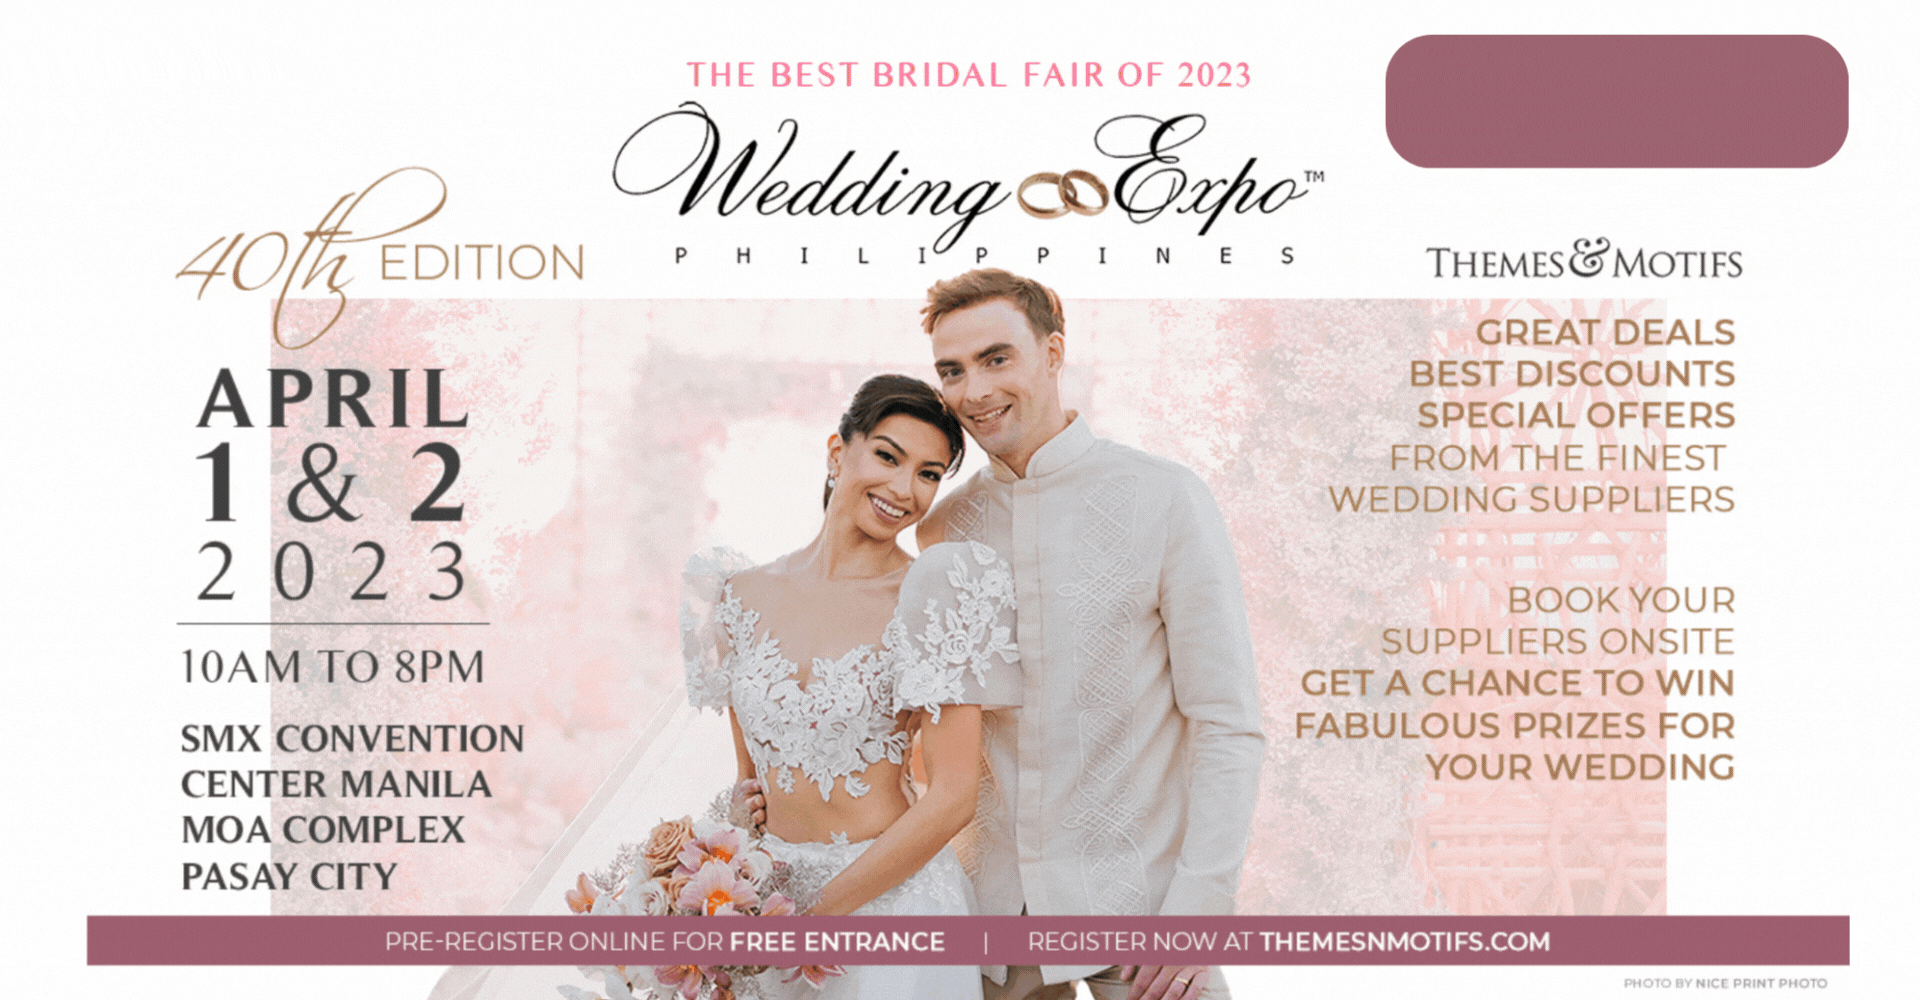 online bridal fair Wedding Expo Philippines March 2023